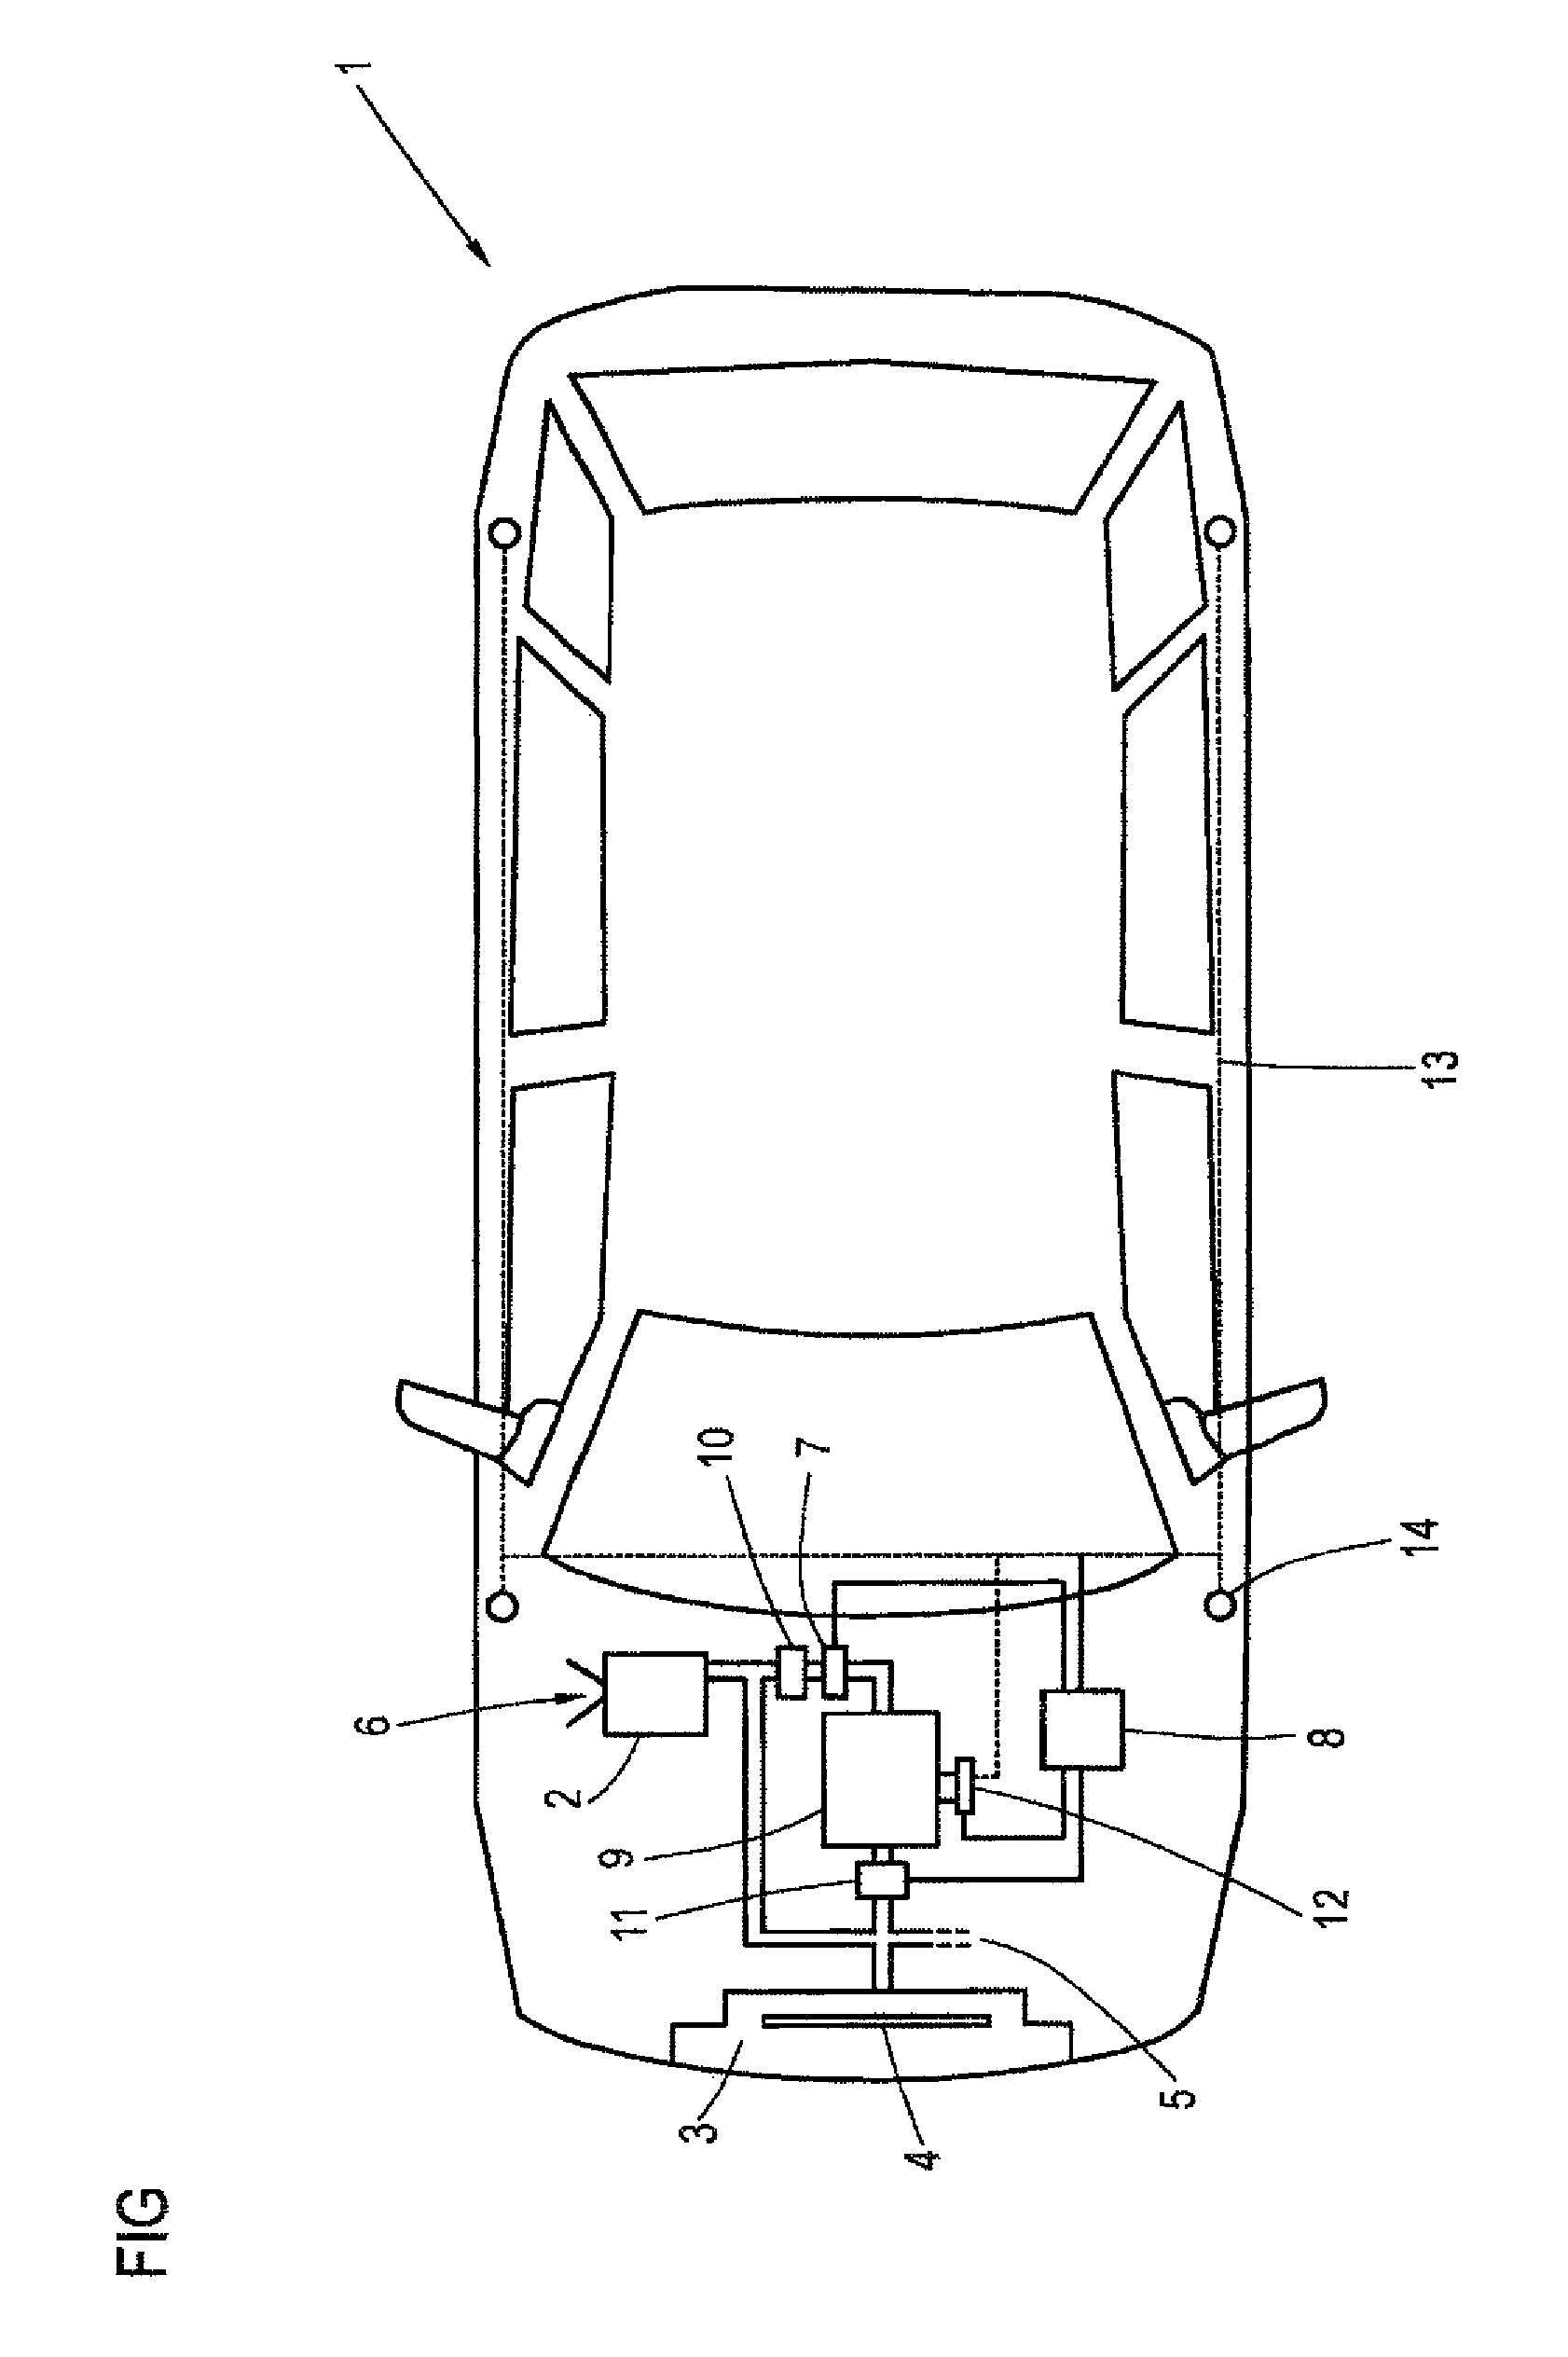 Motor vehicle with battery cooling system